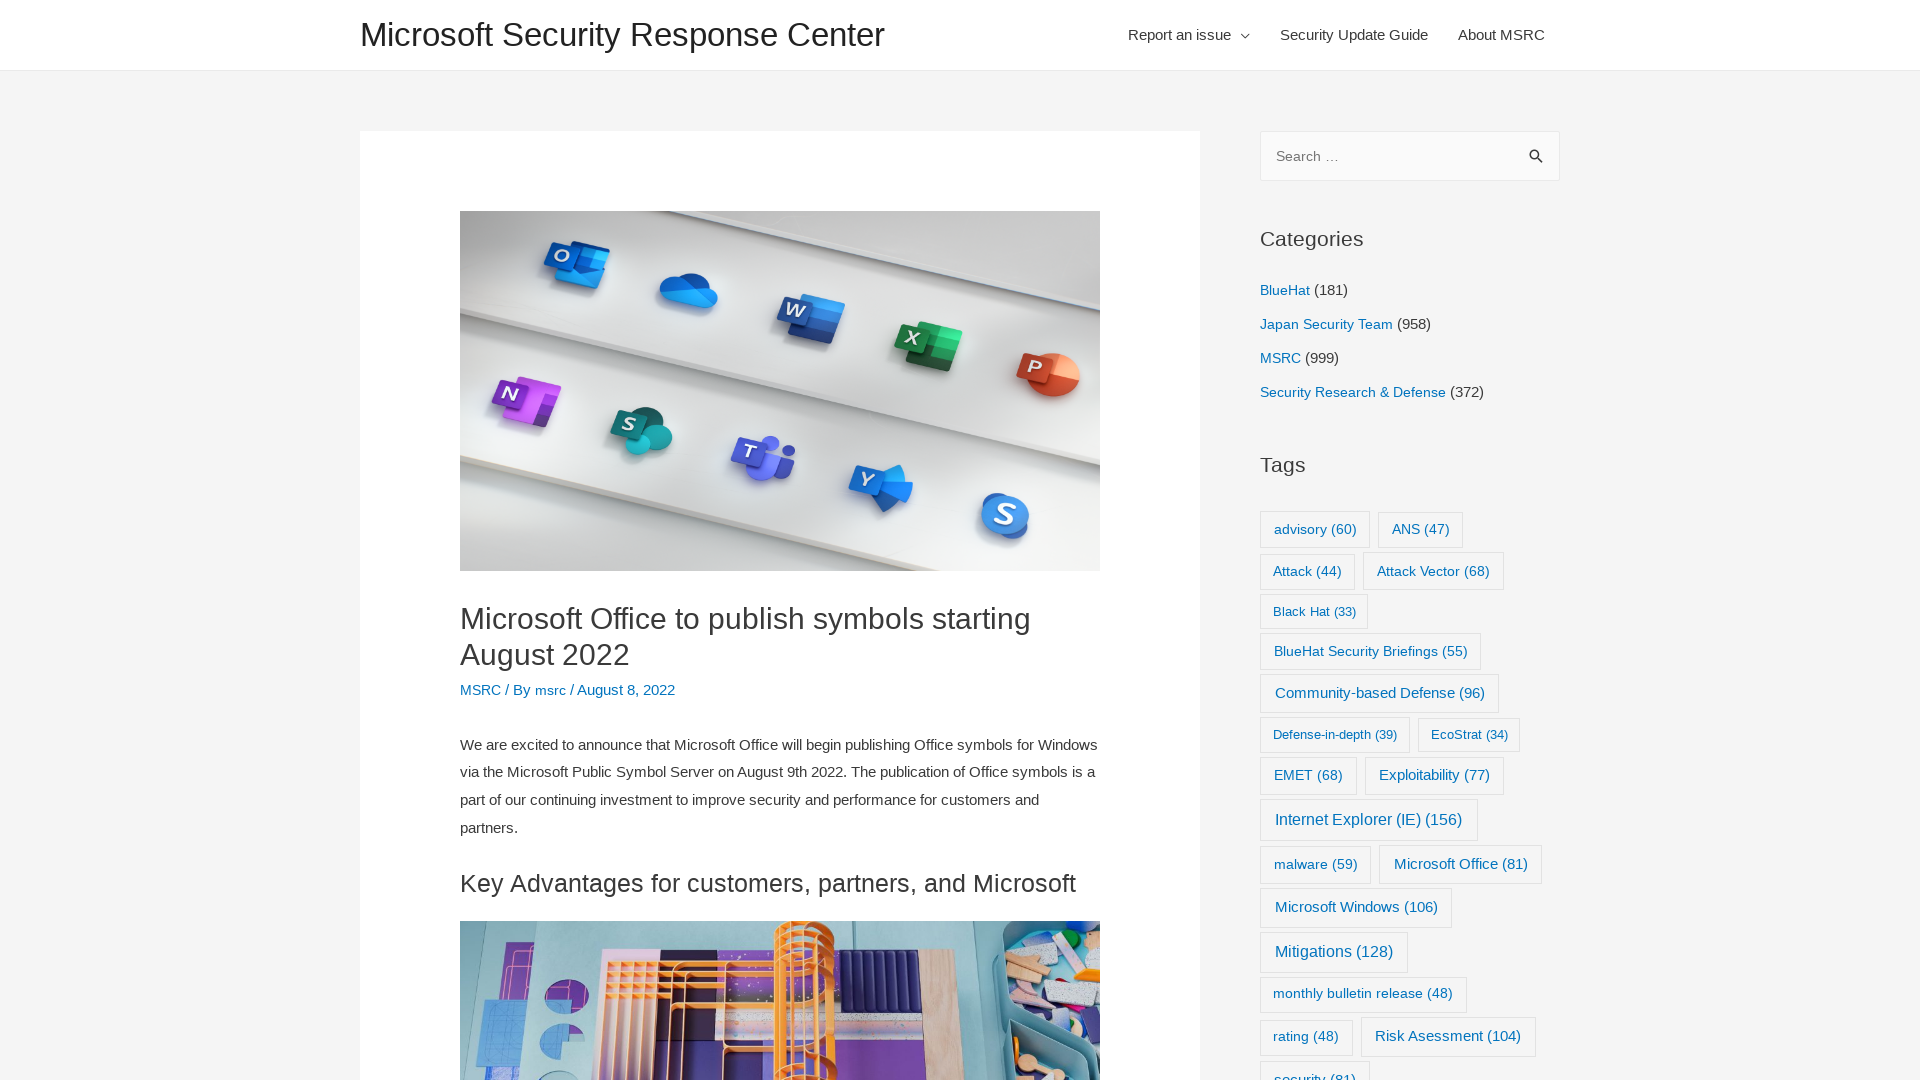 Microsoft Office to publish symbols starting August 2022 – Microsoft Security Response Center